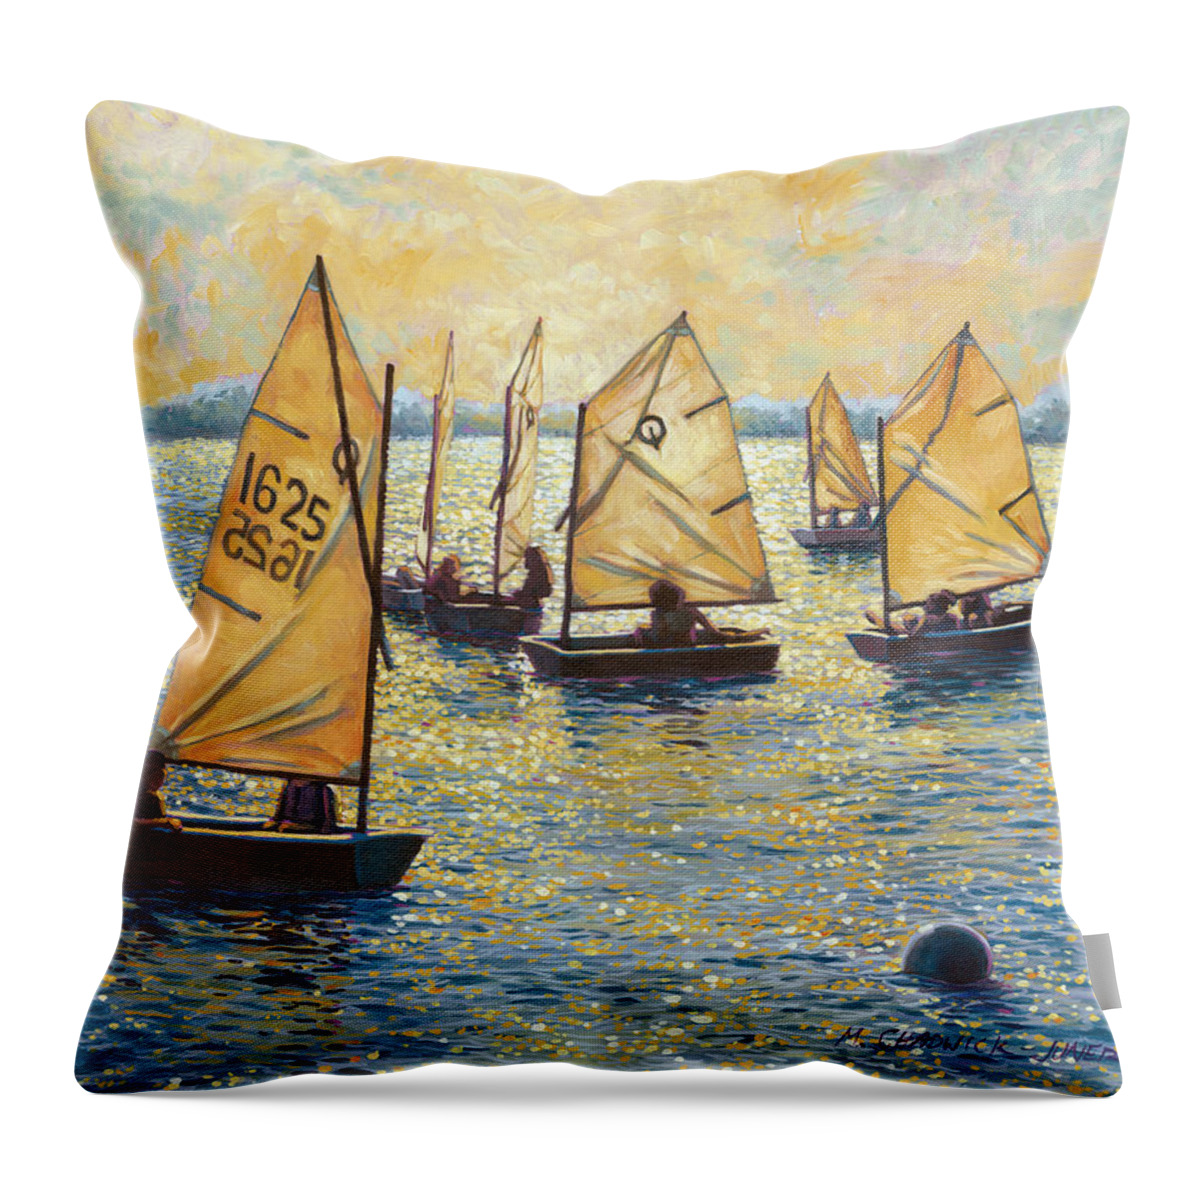 Sun Throw Pillow featuring the painting Sunwashed Sailors by Marguerite Chadwick-Juner